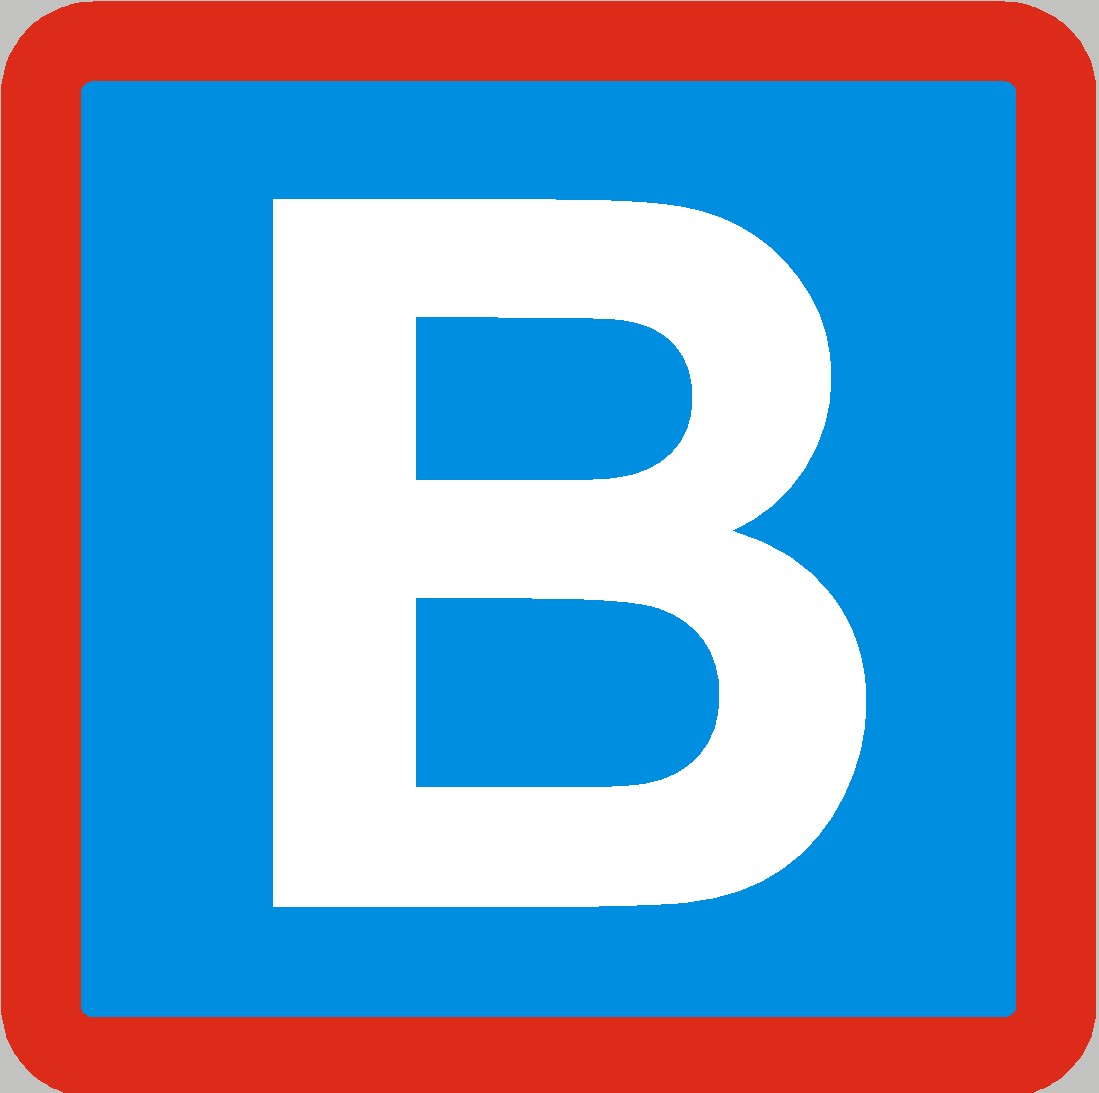 1000+ images about Letter "B" is for Bevans | The ...